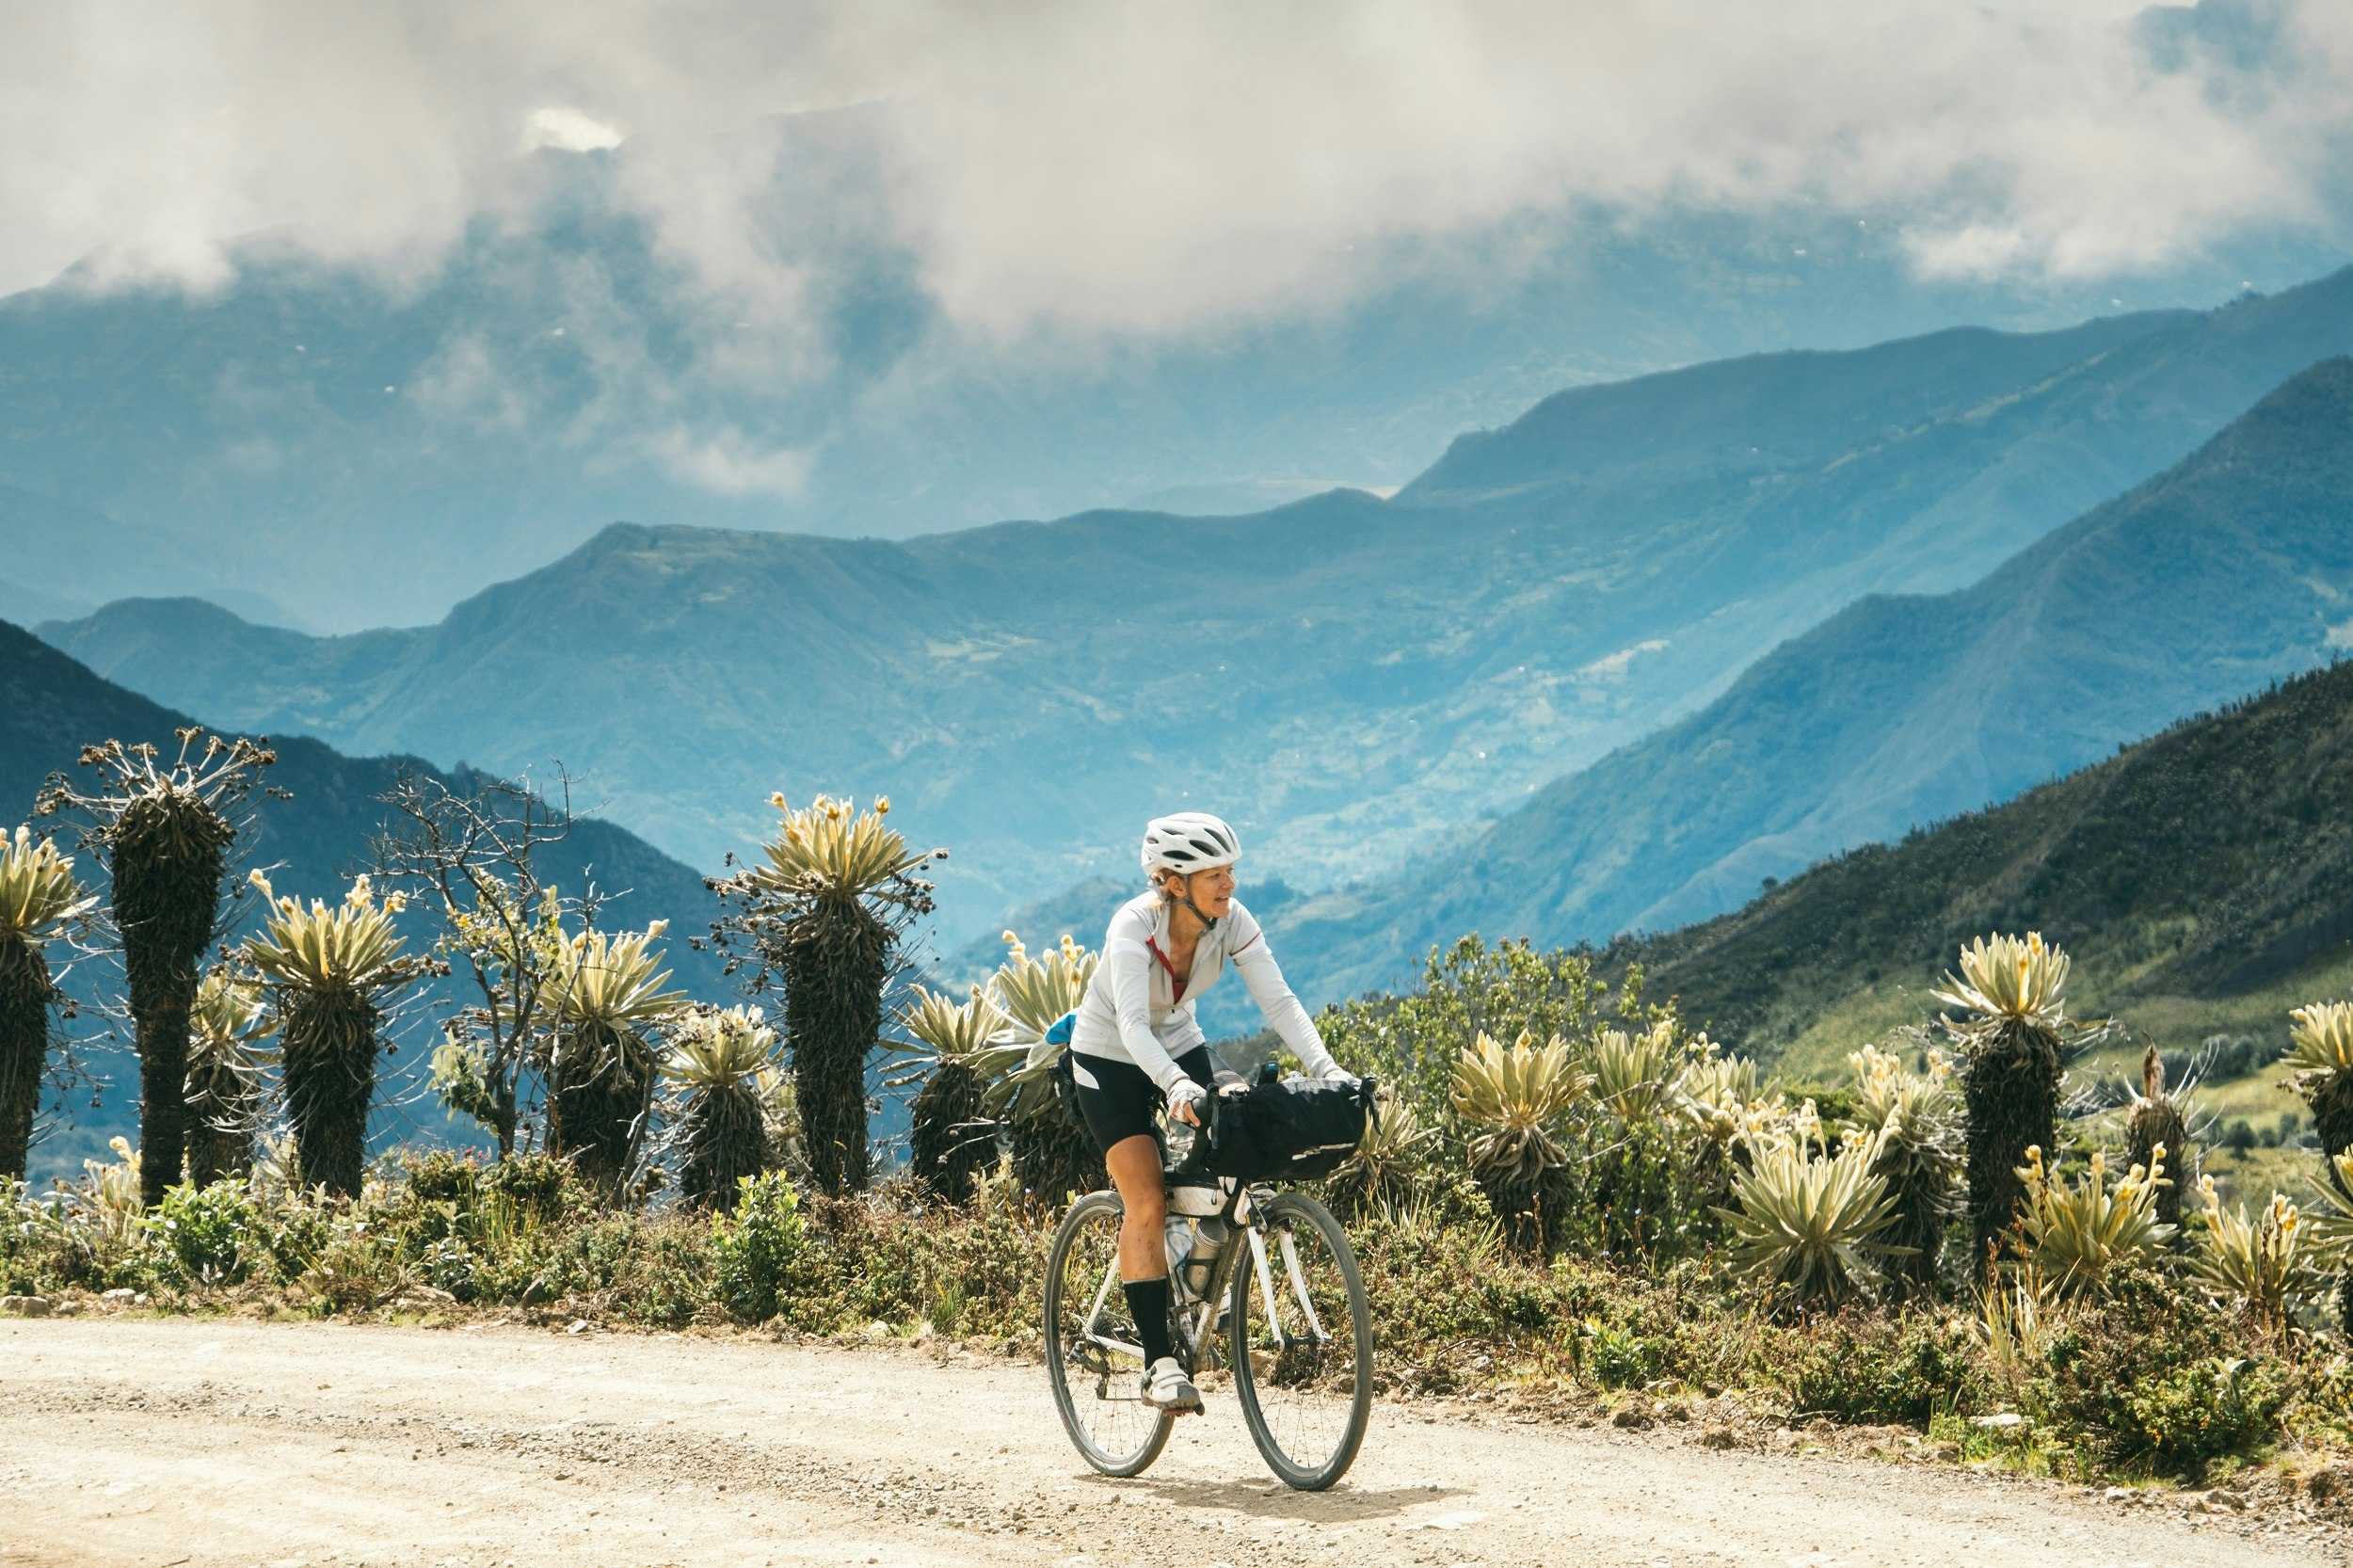 A woman cycles along a dirt road past large flowering cacti, with jungle covered mountain ridges in the distance.